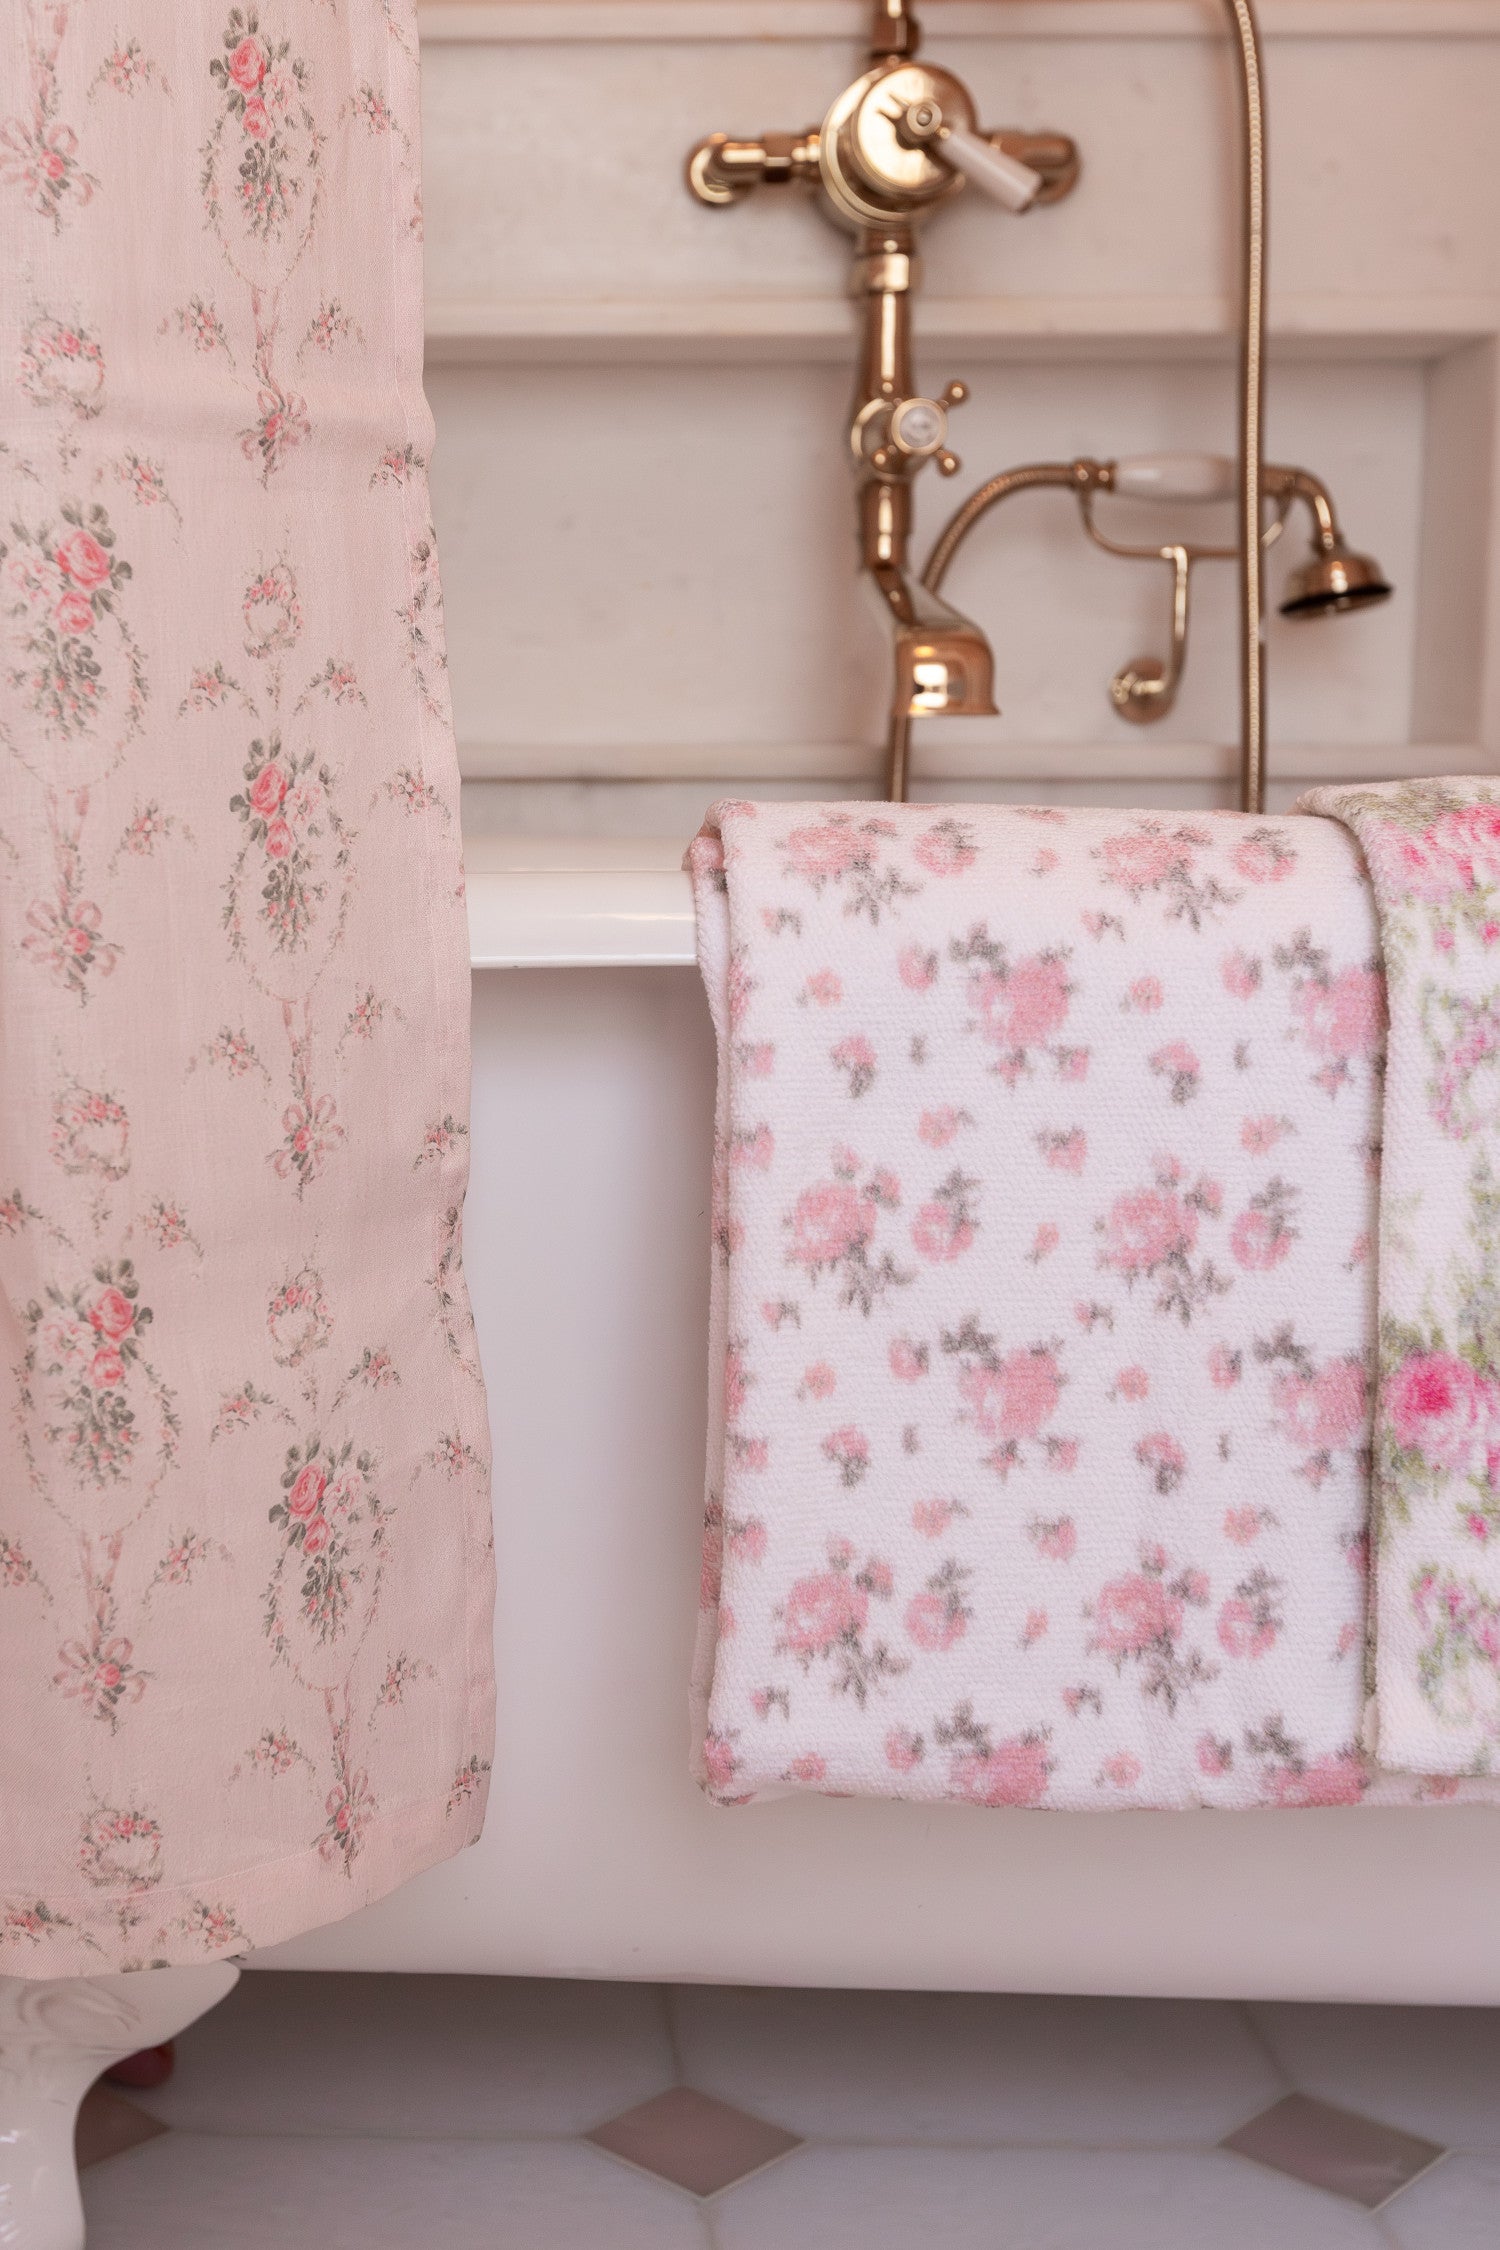 vintage-inspired repeating floral print bath towel in a soft pink against a white back